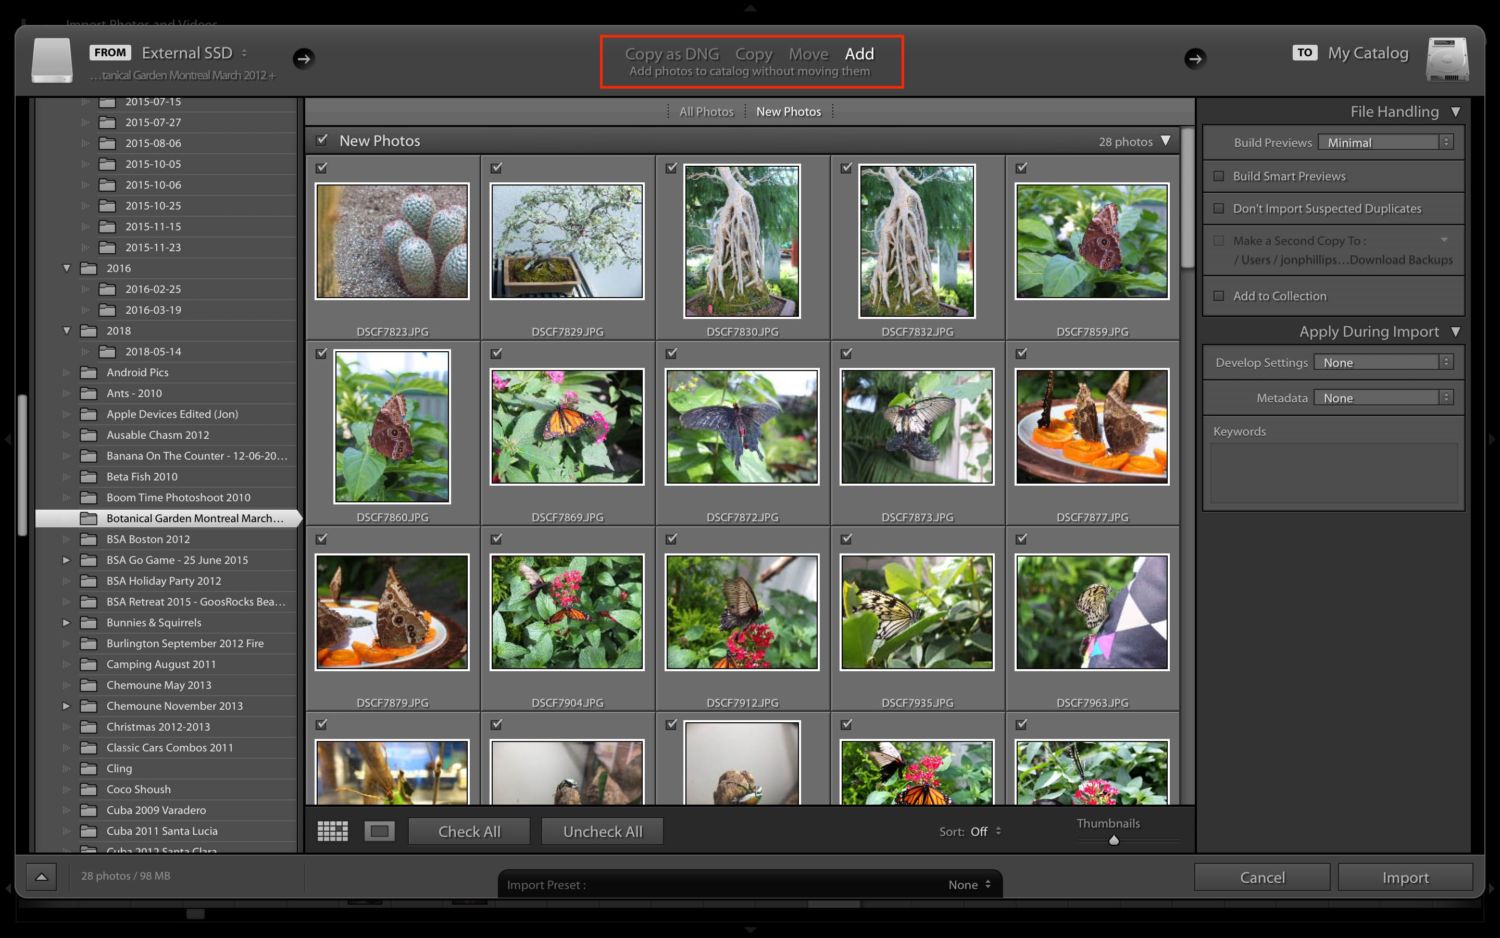 8-key-tools-you-should-be-familiar-with-in-lightroom-classic